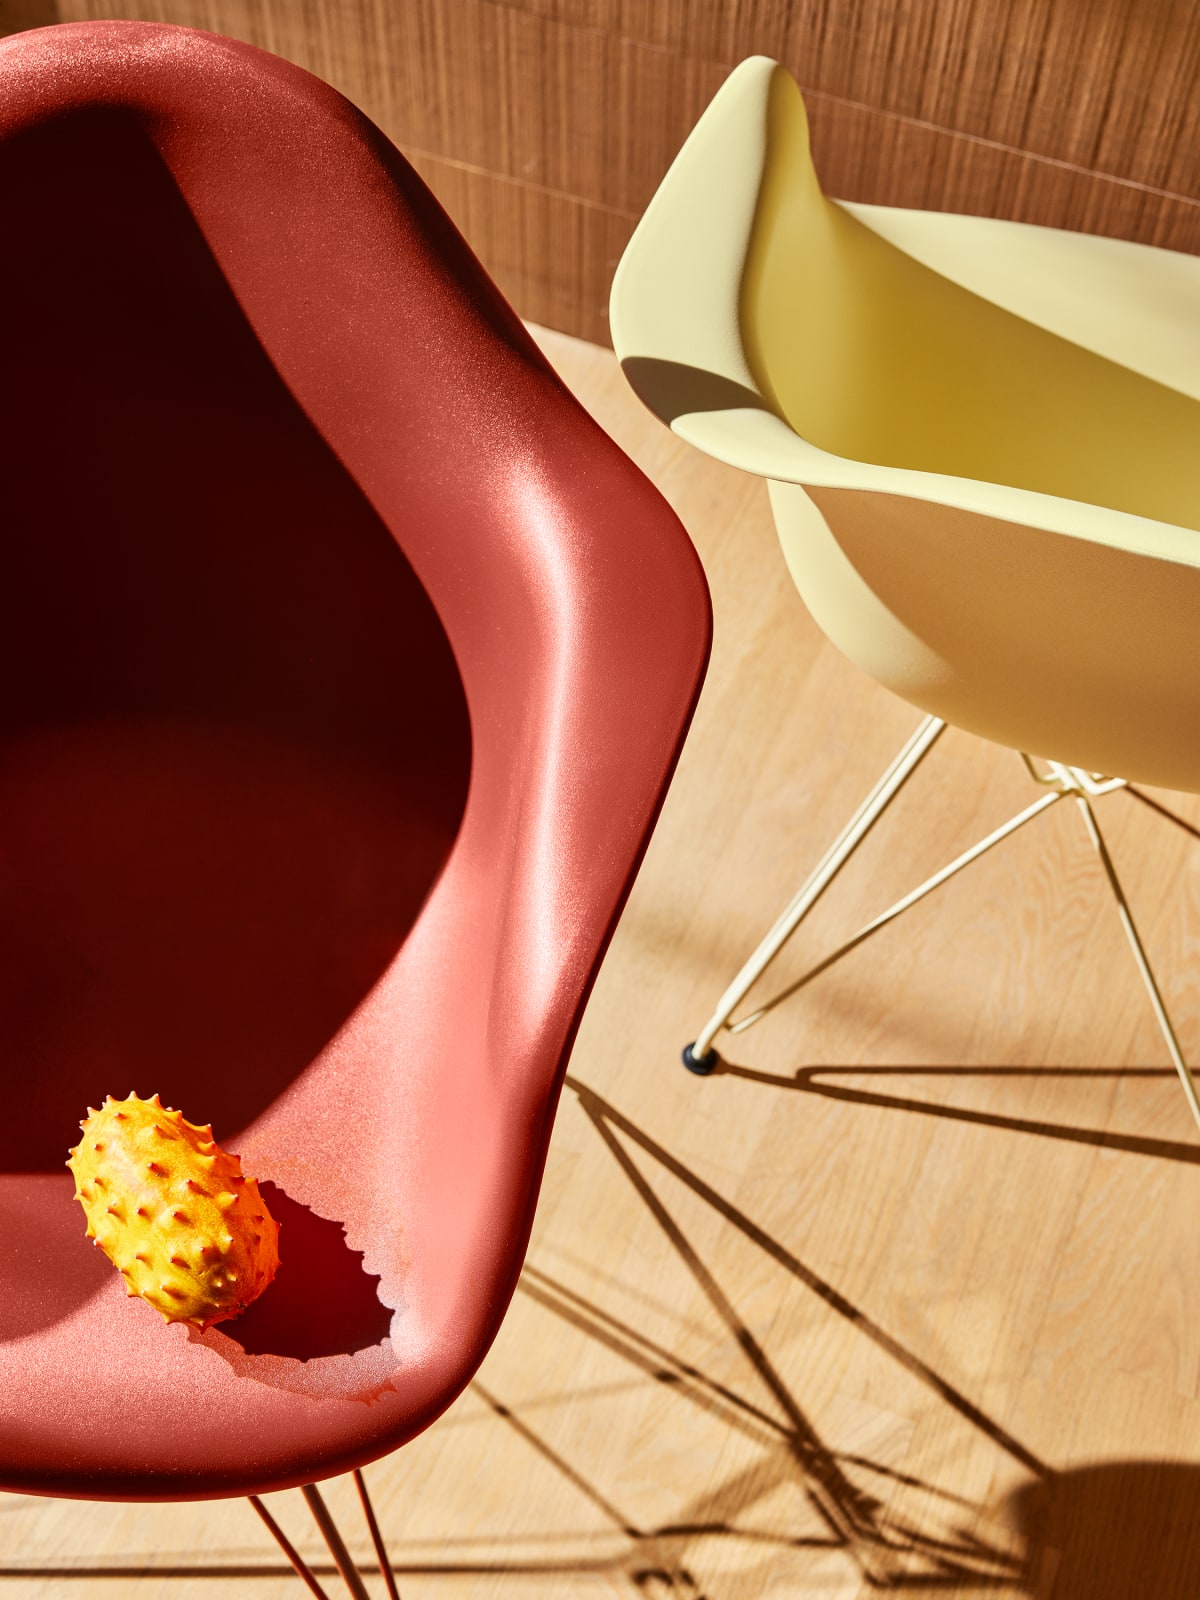 Herman Miller x HAY Eames Molded Plastic Armchair in iron red and yellow.